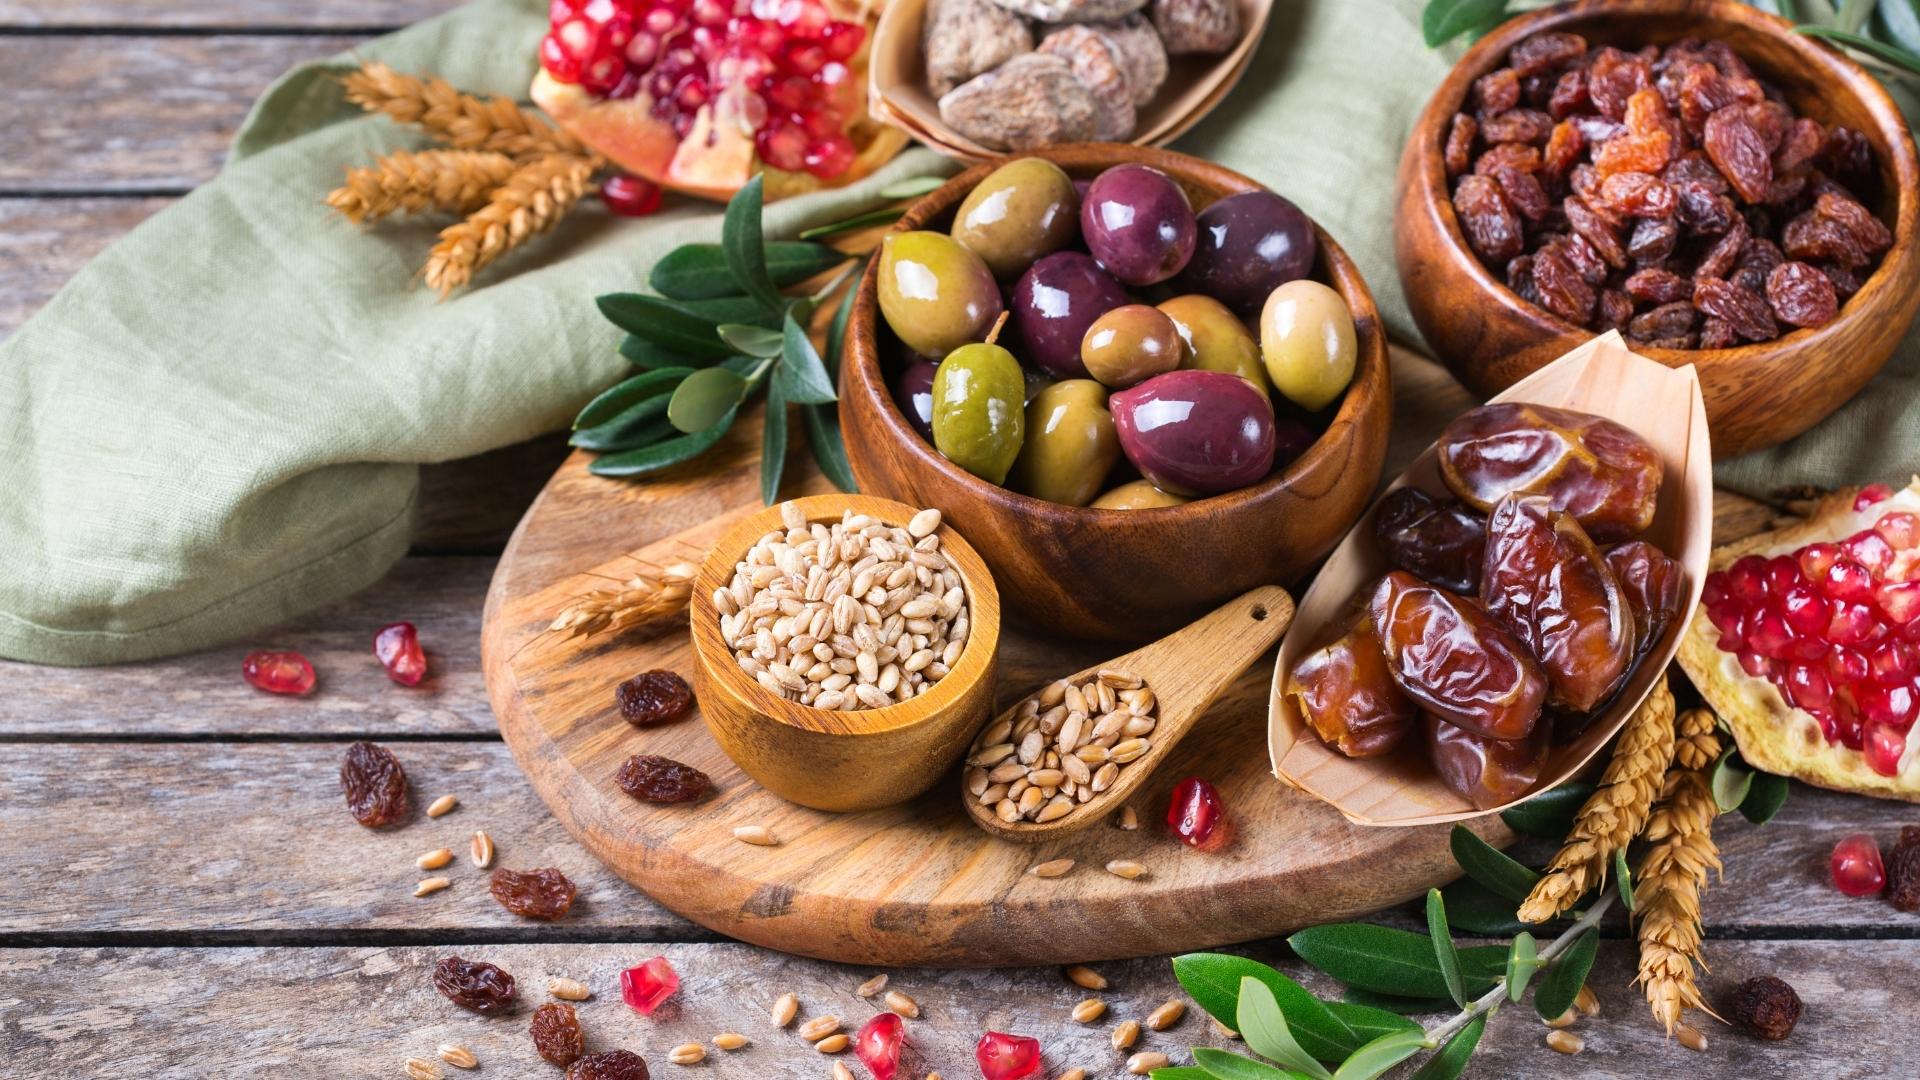 A group of wood bowls filled with olives, dates, grains, pomegranate arils, and raisins, surrounded by a green napkin on a brown wooden table.